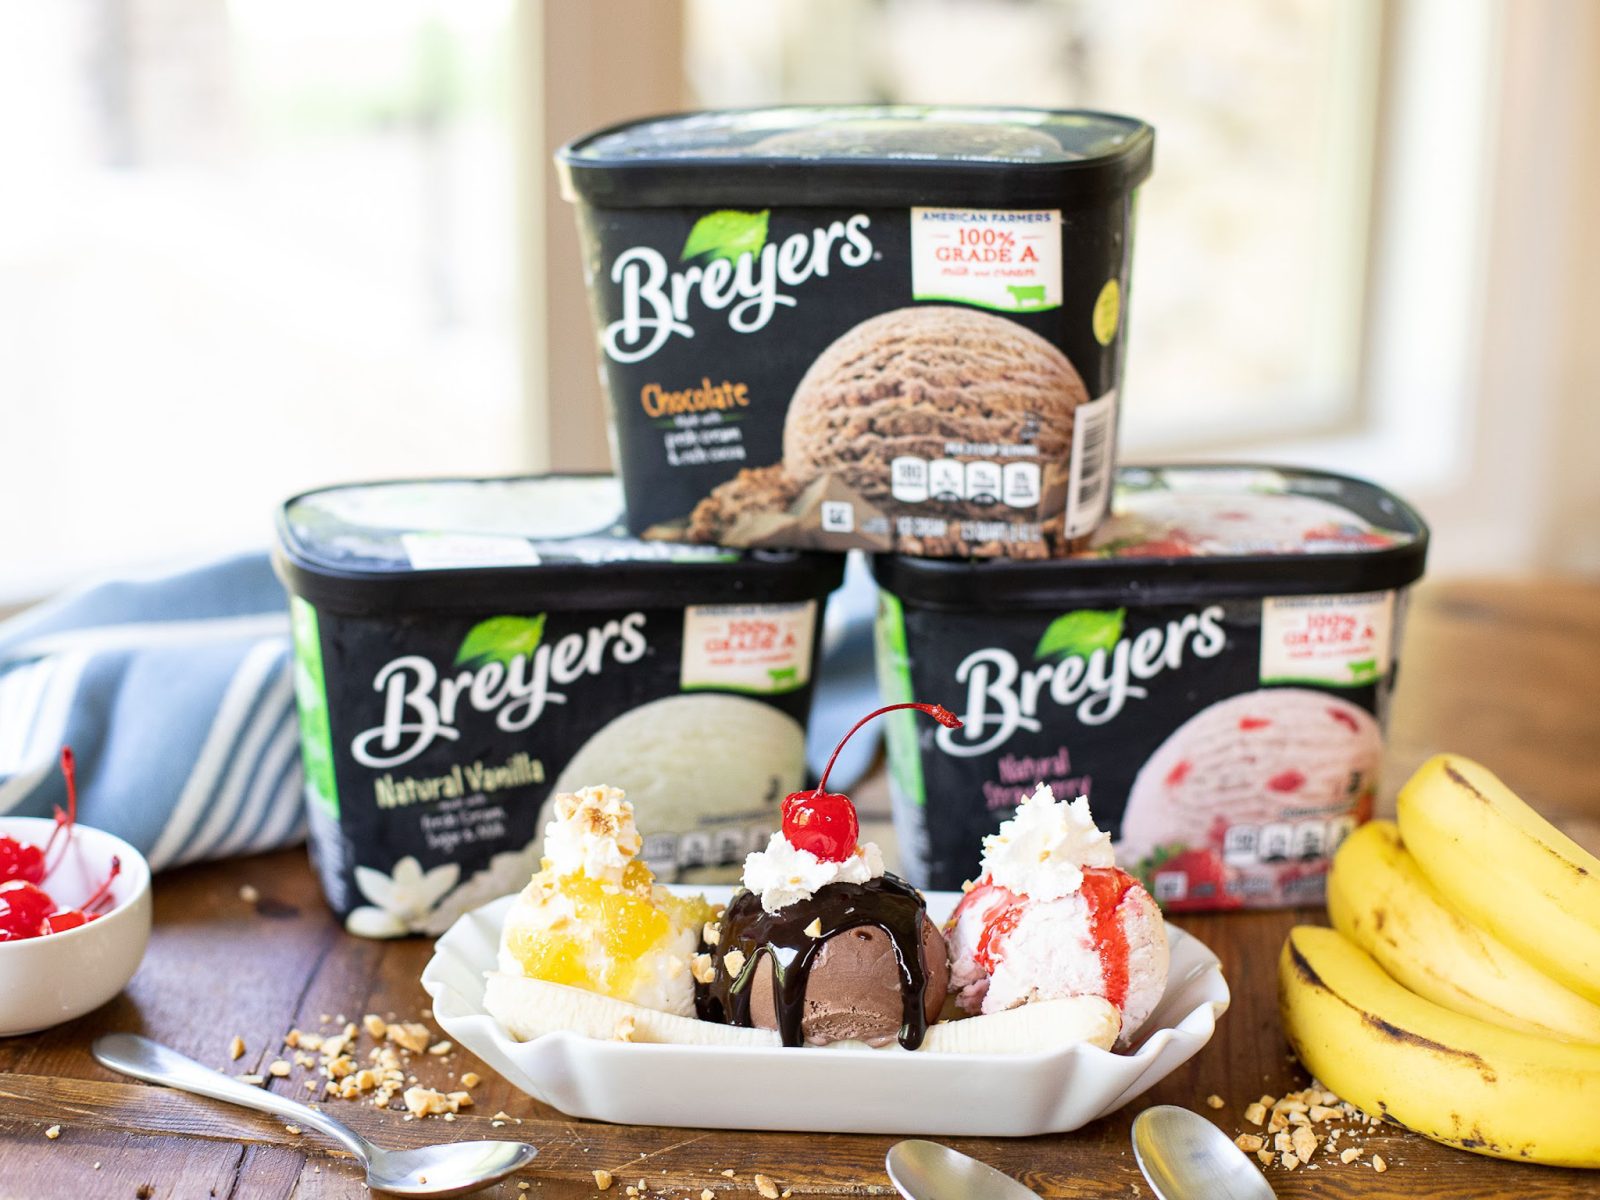 Breyers Coupon Makes Ice Cream As Low As $2.29 At Publix